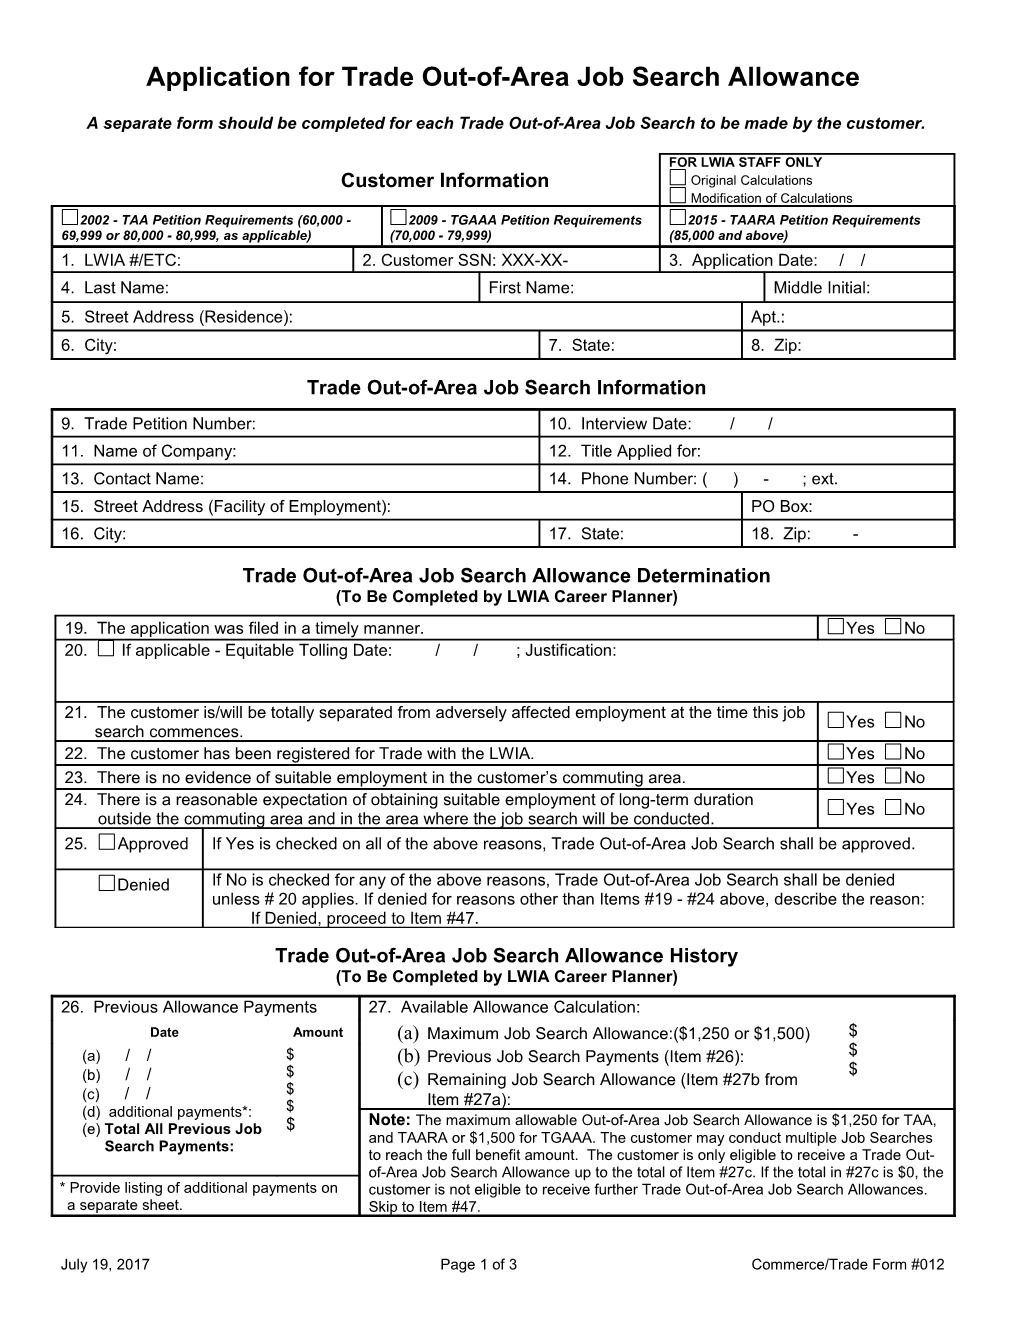 Form #012 Application for Trade Out-Of-Area Job Search Allowance (MS Word) 3-01-14